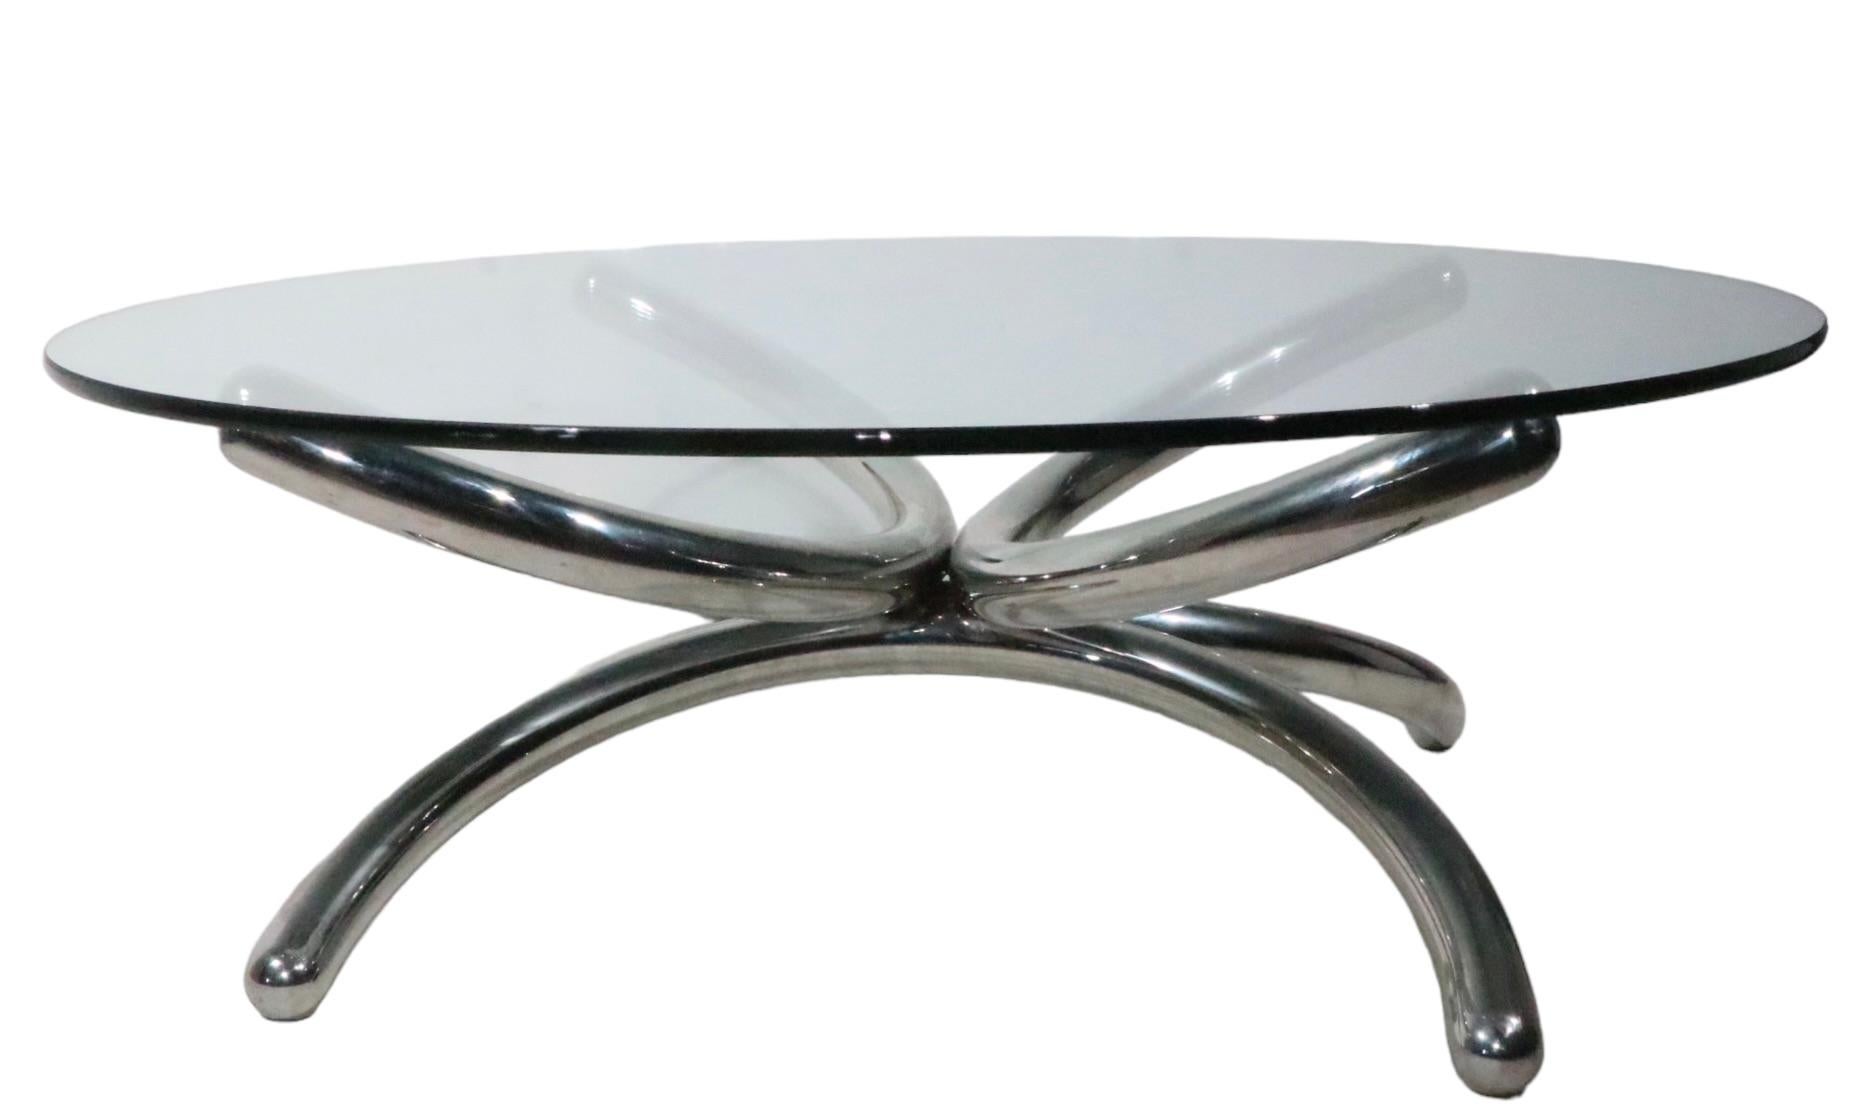  Round Chrome and Glass Coffee Cocktail Table c 1960/70s possibly Paul Tuttle  For Sale 7